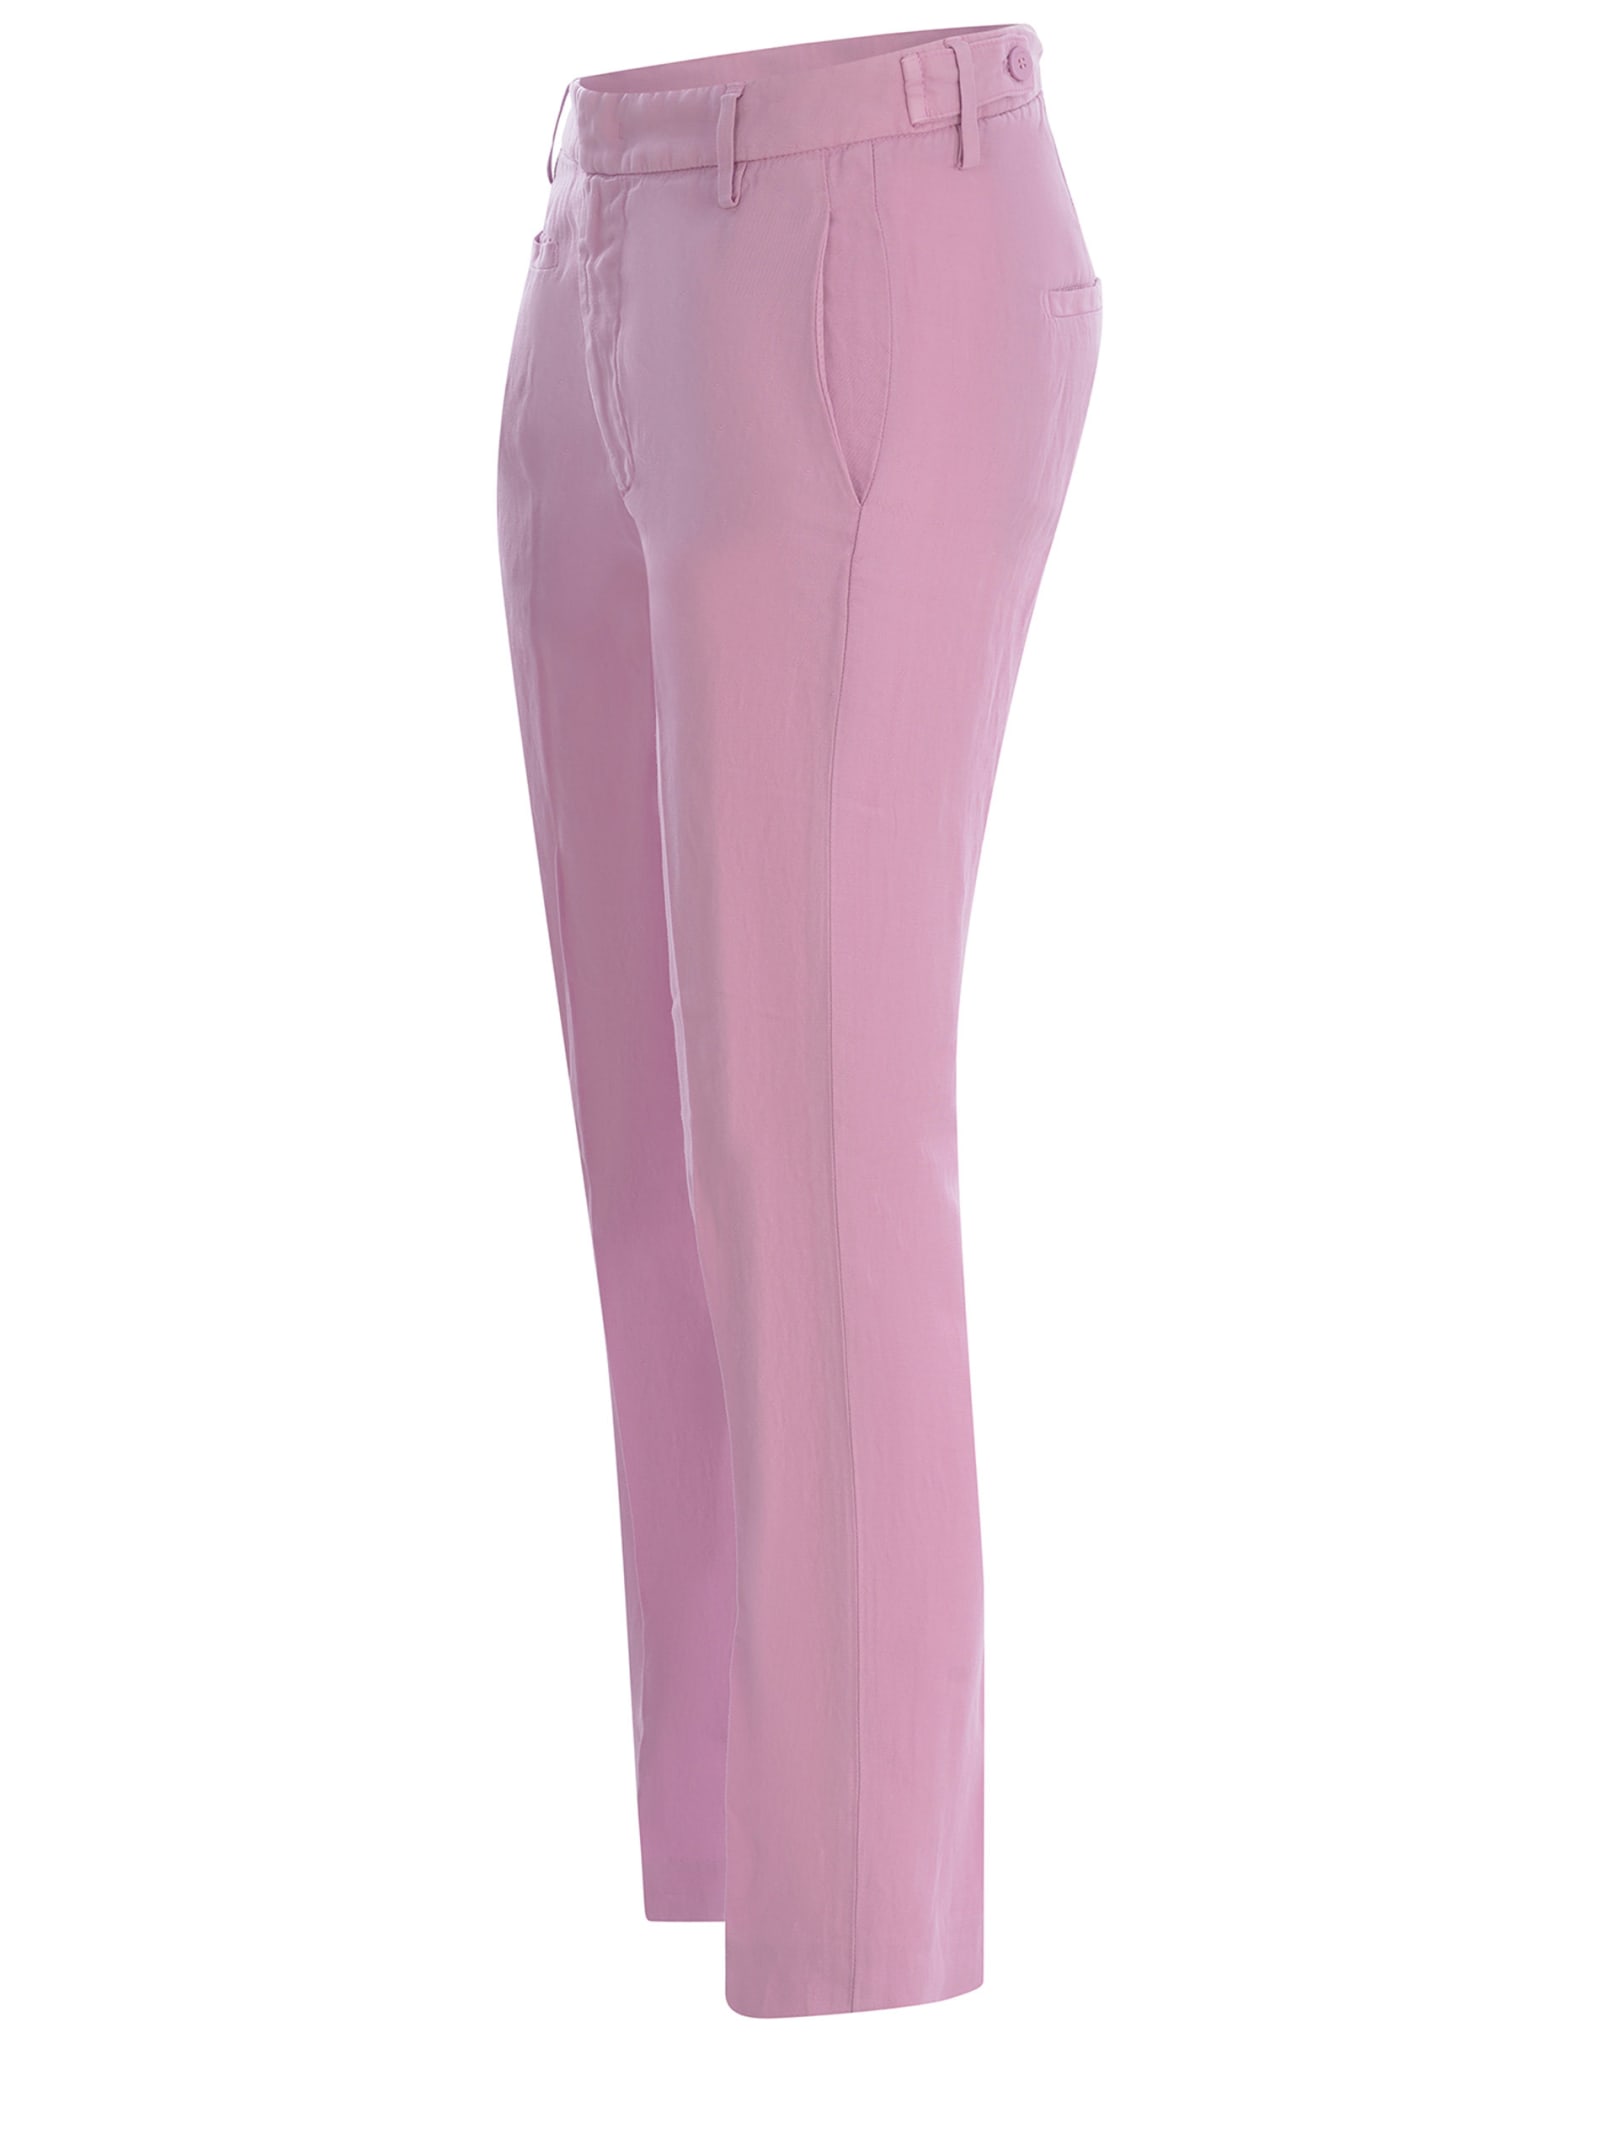 Shop Dondup Trousers  Ariel 27inches Made Of Linen Blend In Rosa